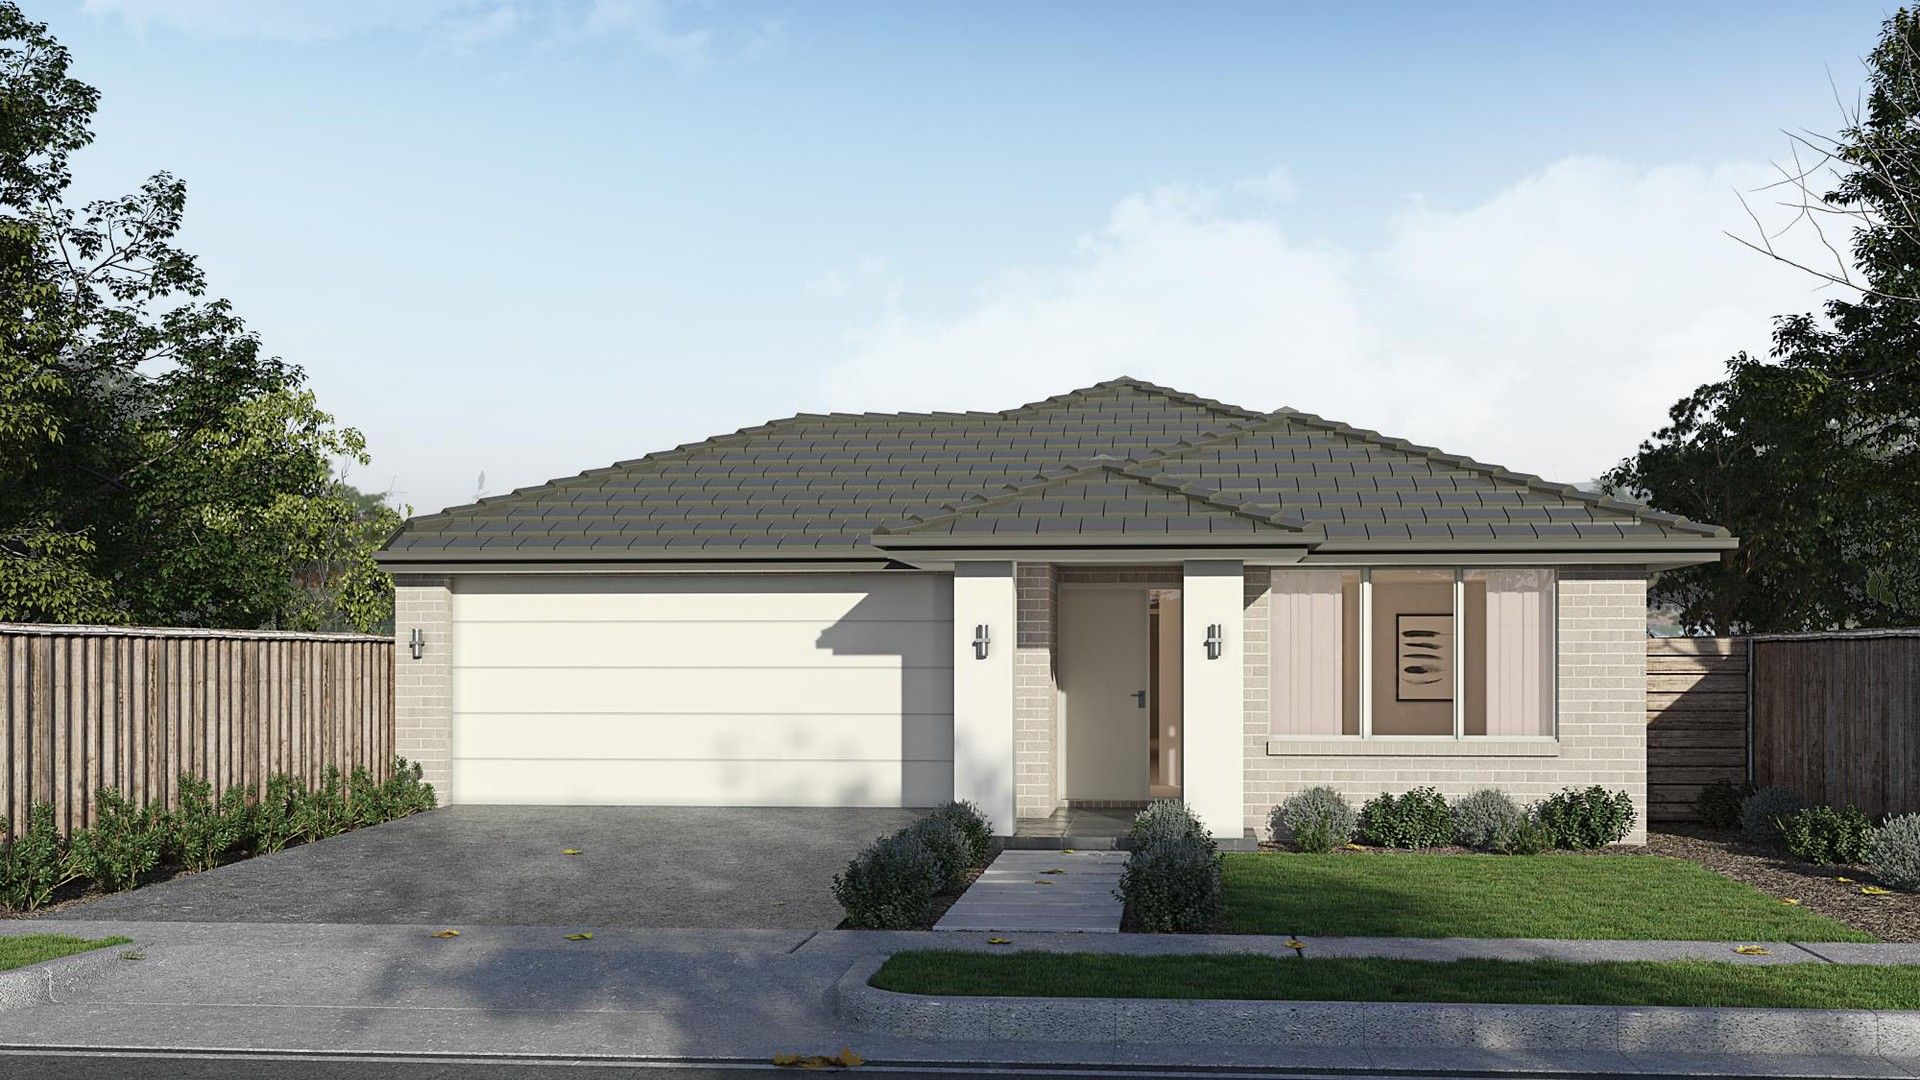 4 bedrooms New House & Land in 3191 Lavant Street SEAFORD HEIGHTS SA, 5169